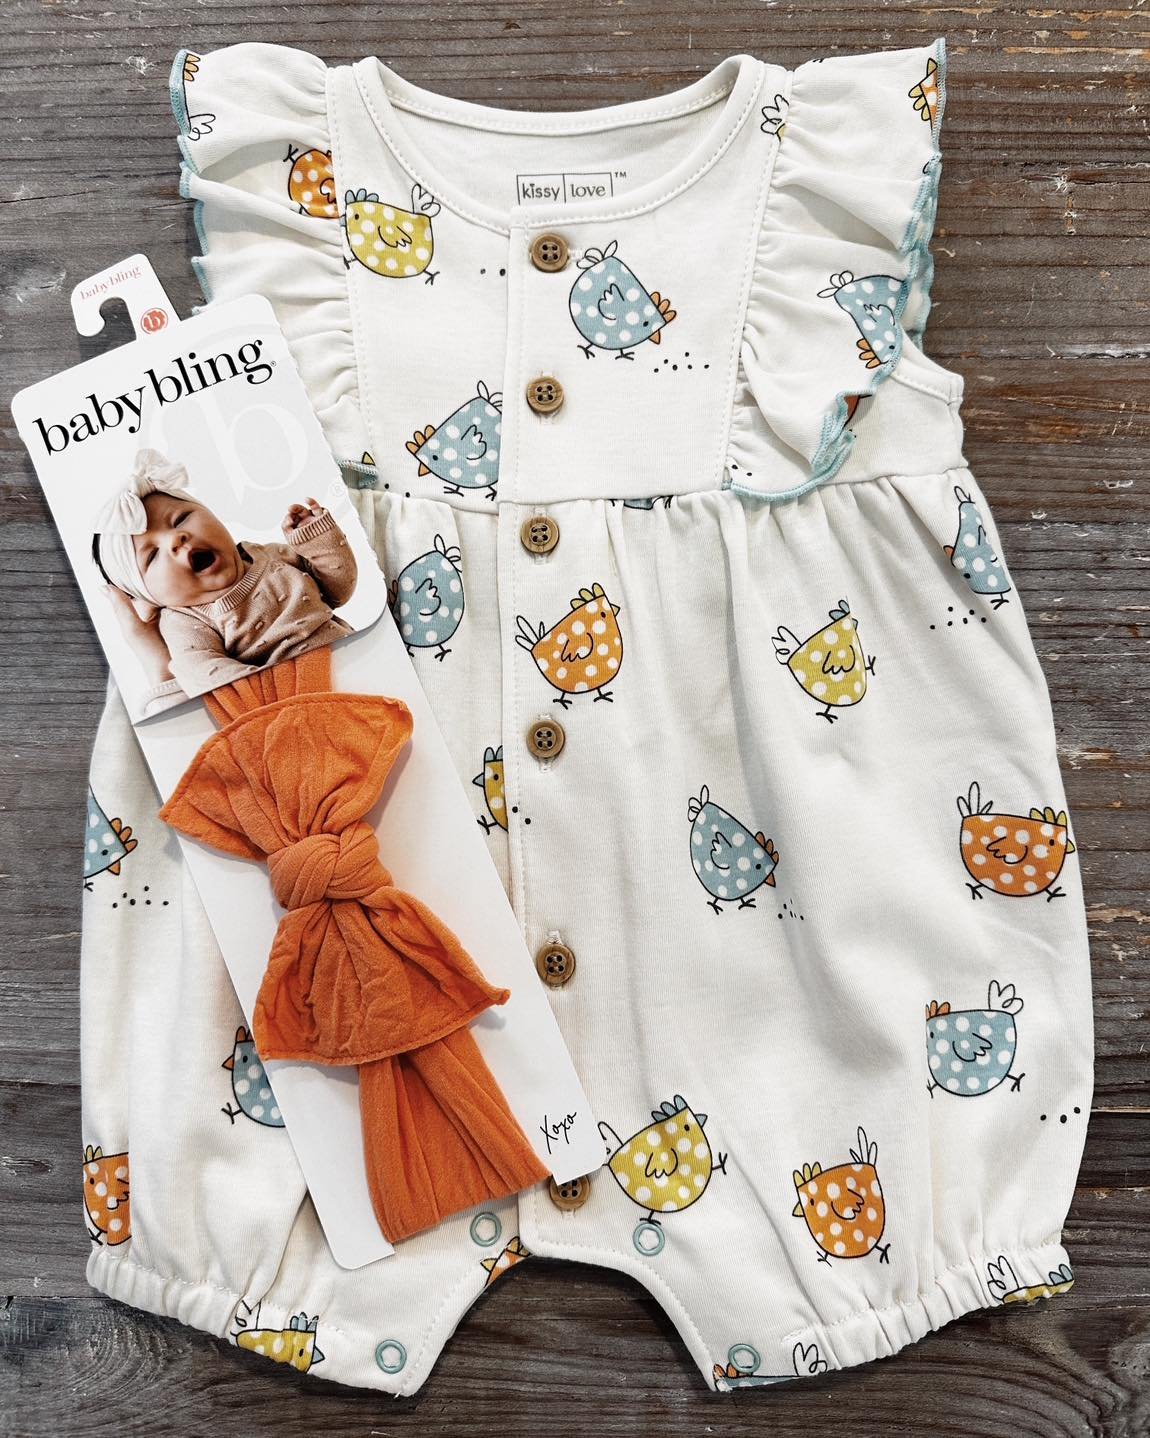 🐣 Go ahead, count your chickens! We know your little one is going to love wearing this outfit. 

#shopsmall #shoplocal #ababynaturally #babyboutique #supportsmallbusiness #kissykissybaby #babybling #babyblingbows